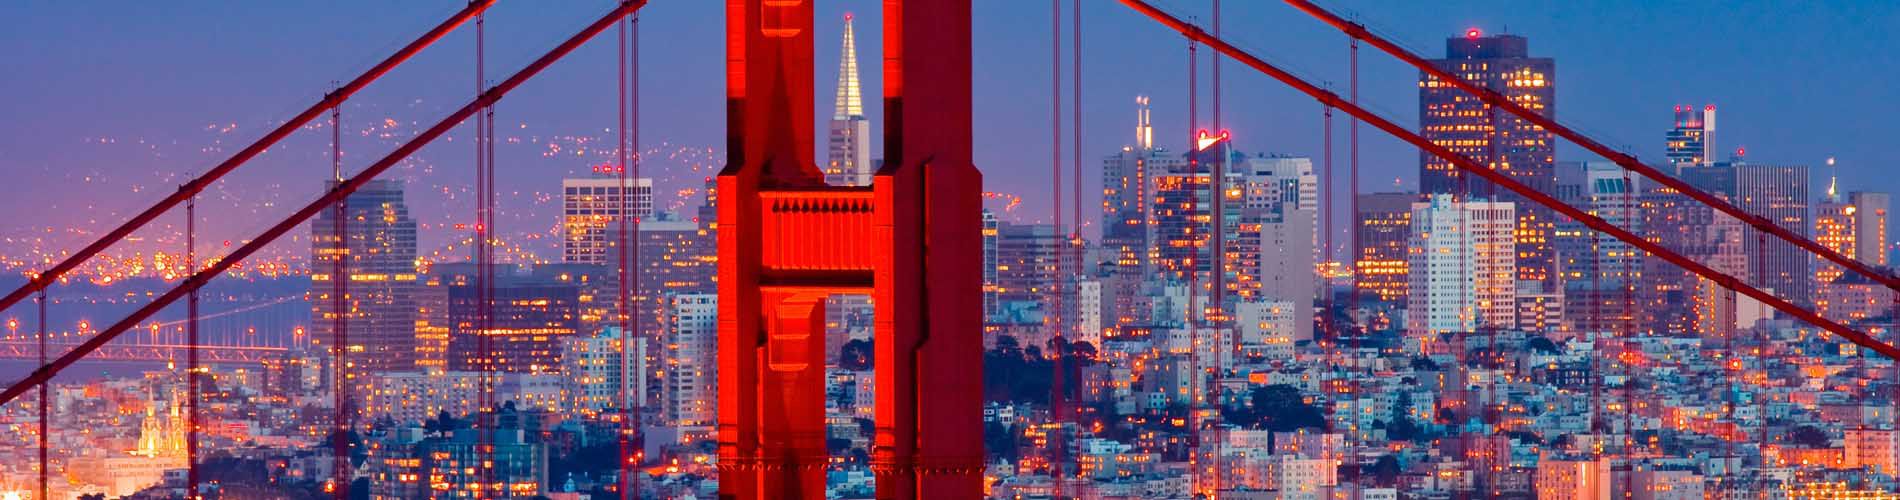 A skyline image of Downtown San Francisco and the Golden Gate Bridge.